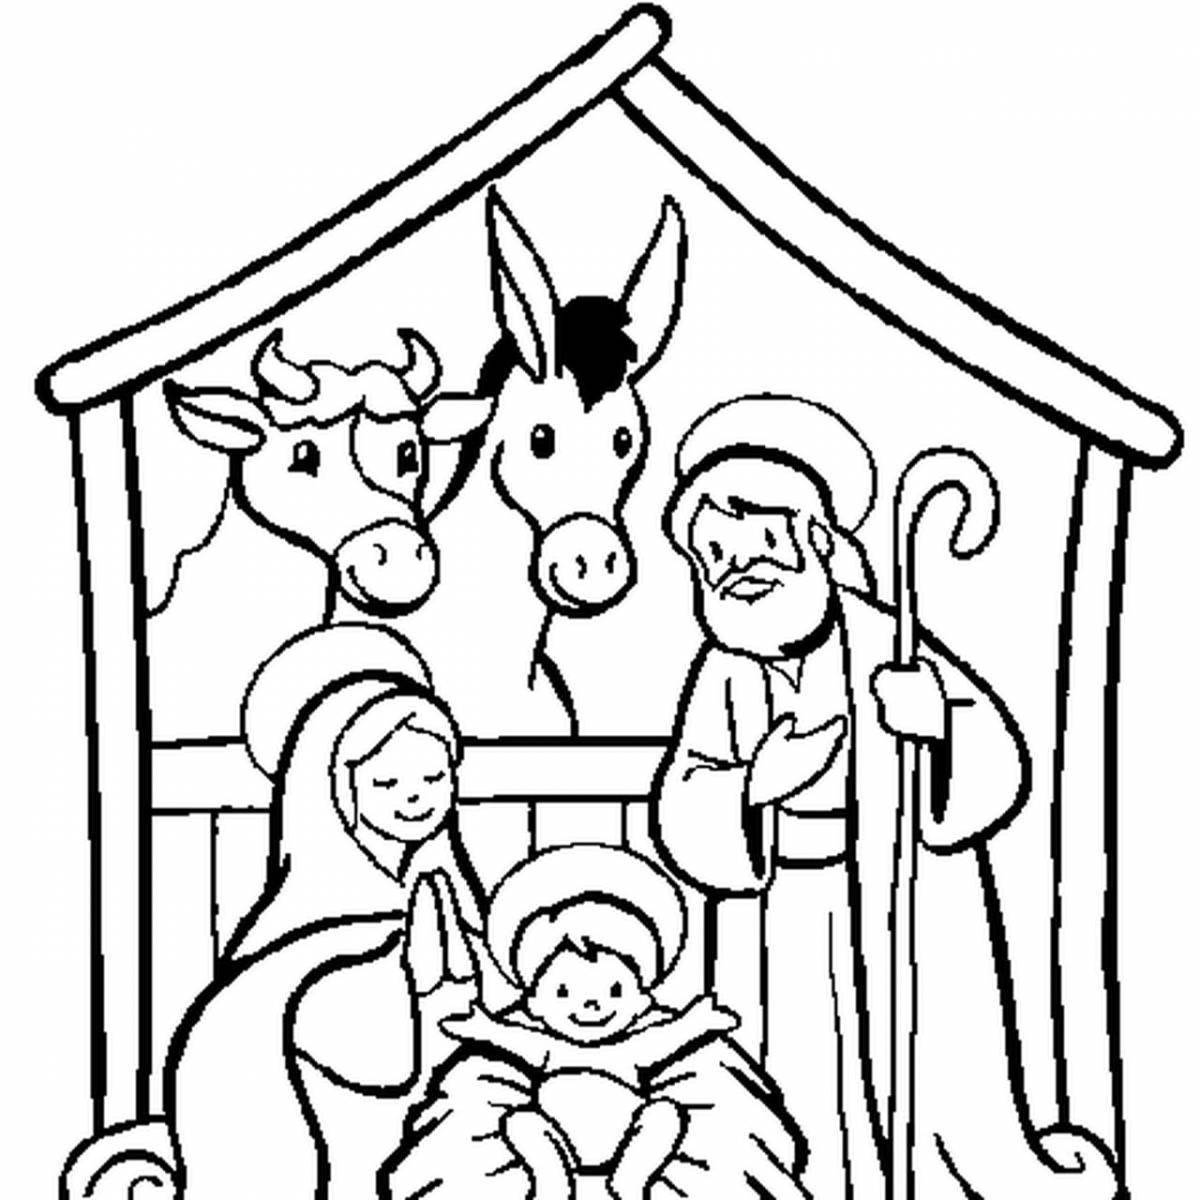 Great Christmas coloring book for Sunday school kids